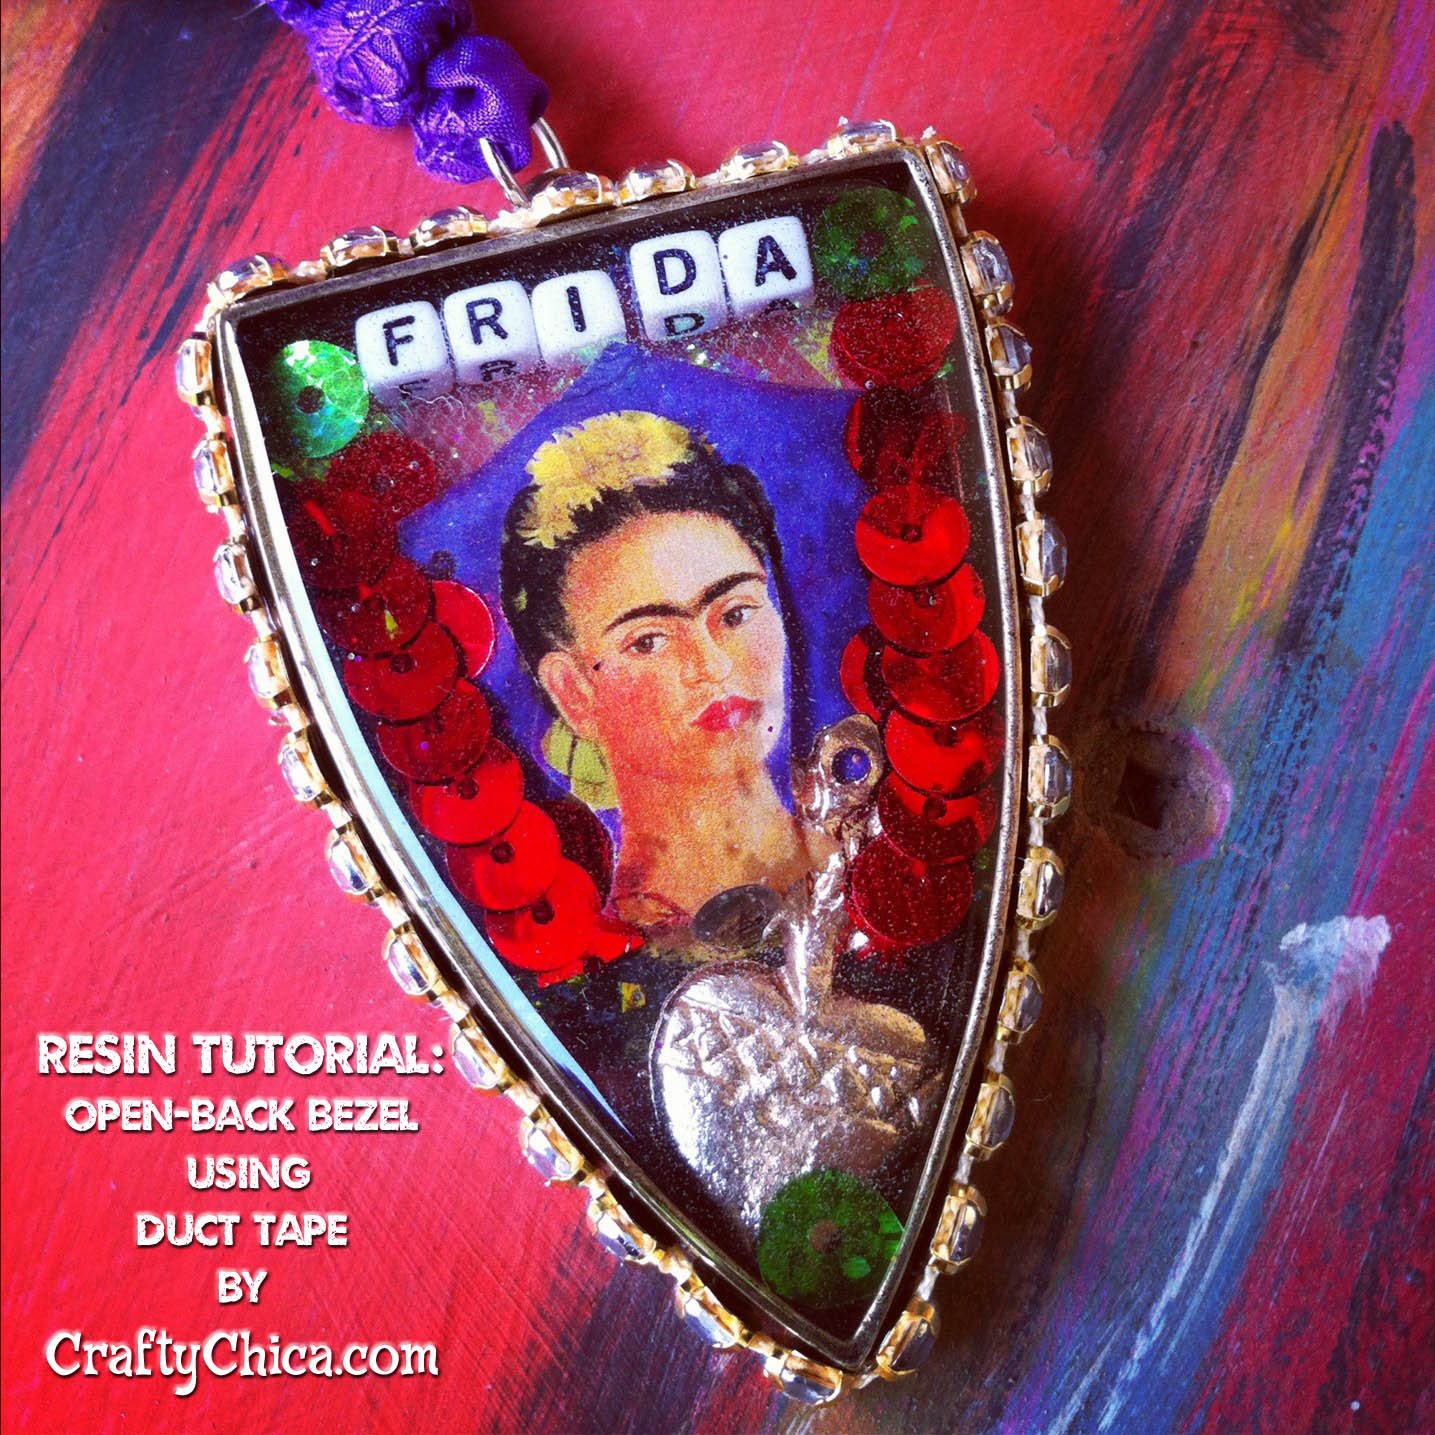 Resin pendant tutorial - open backed, CraftyChica.com